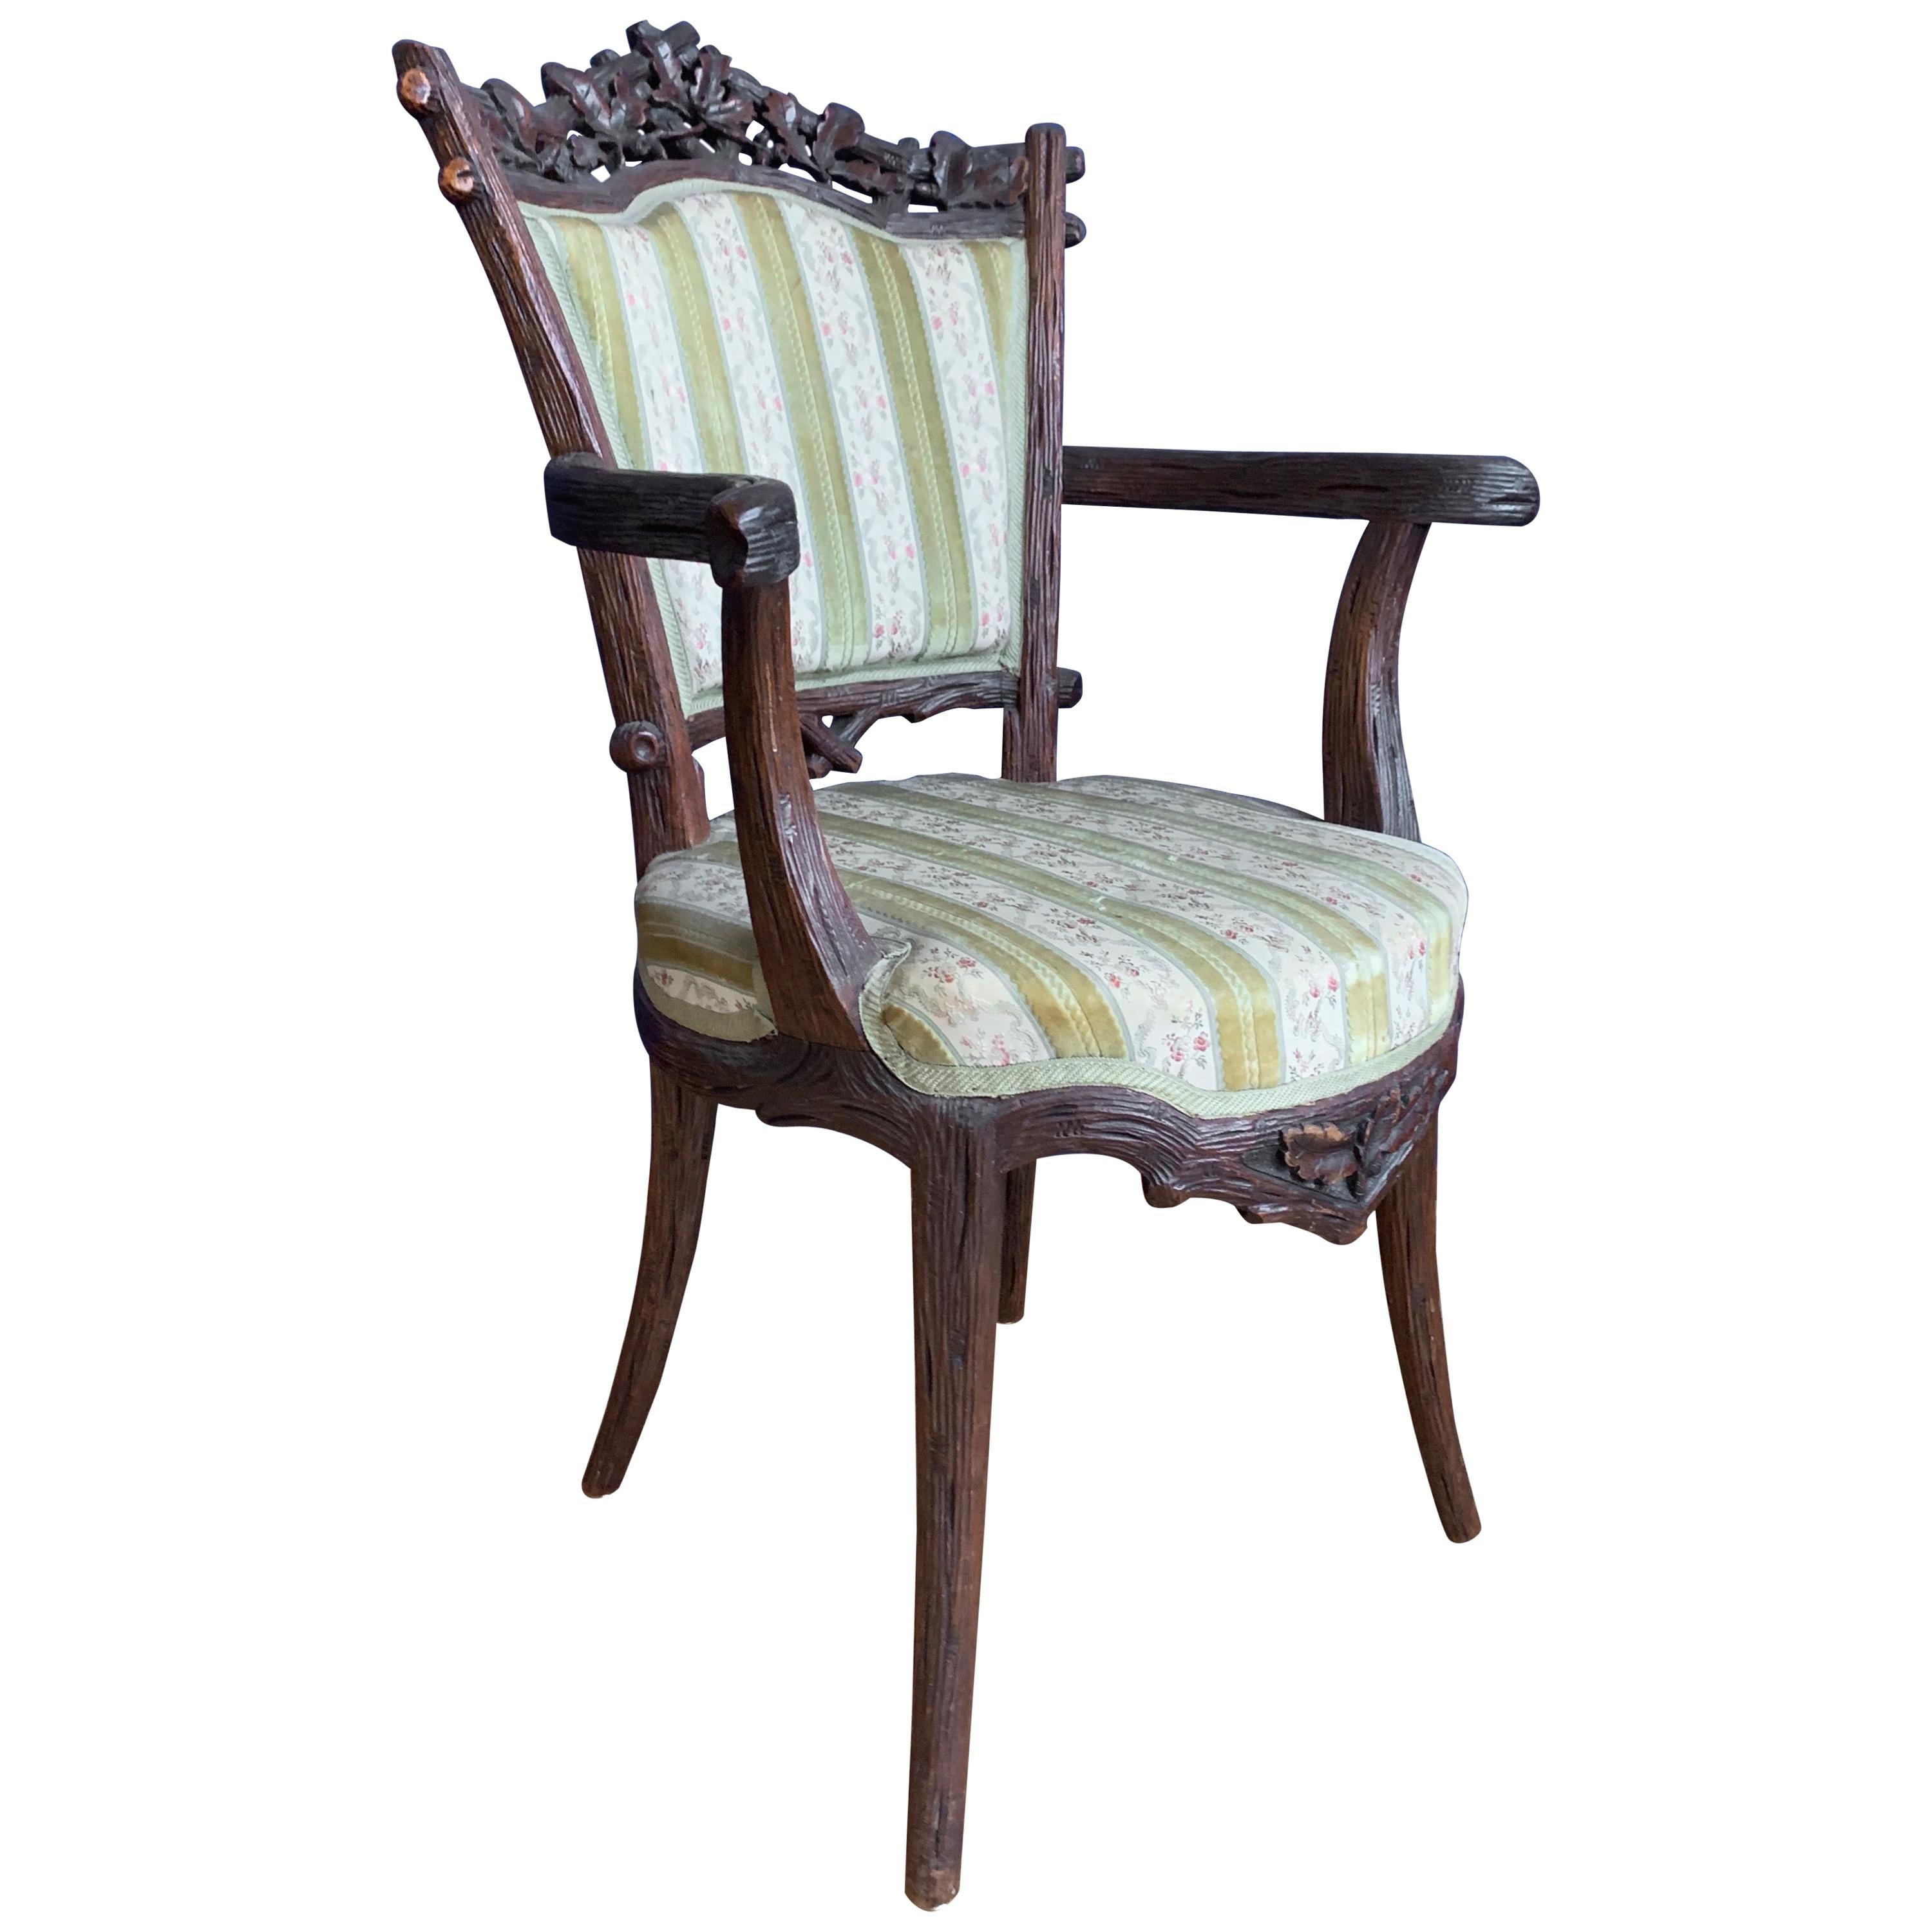 Rare 19th Century Black Forest Walnut Armchair by Horrix with Classy Upholstery For Sale